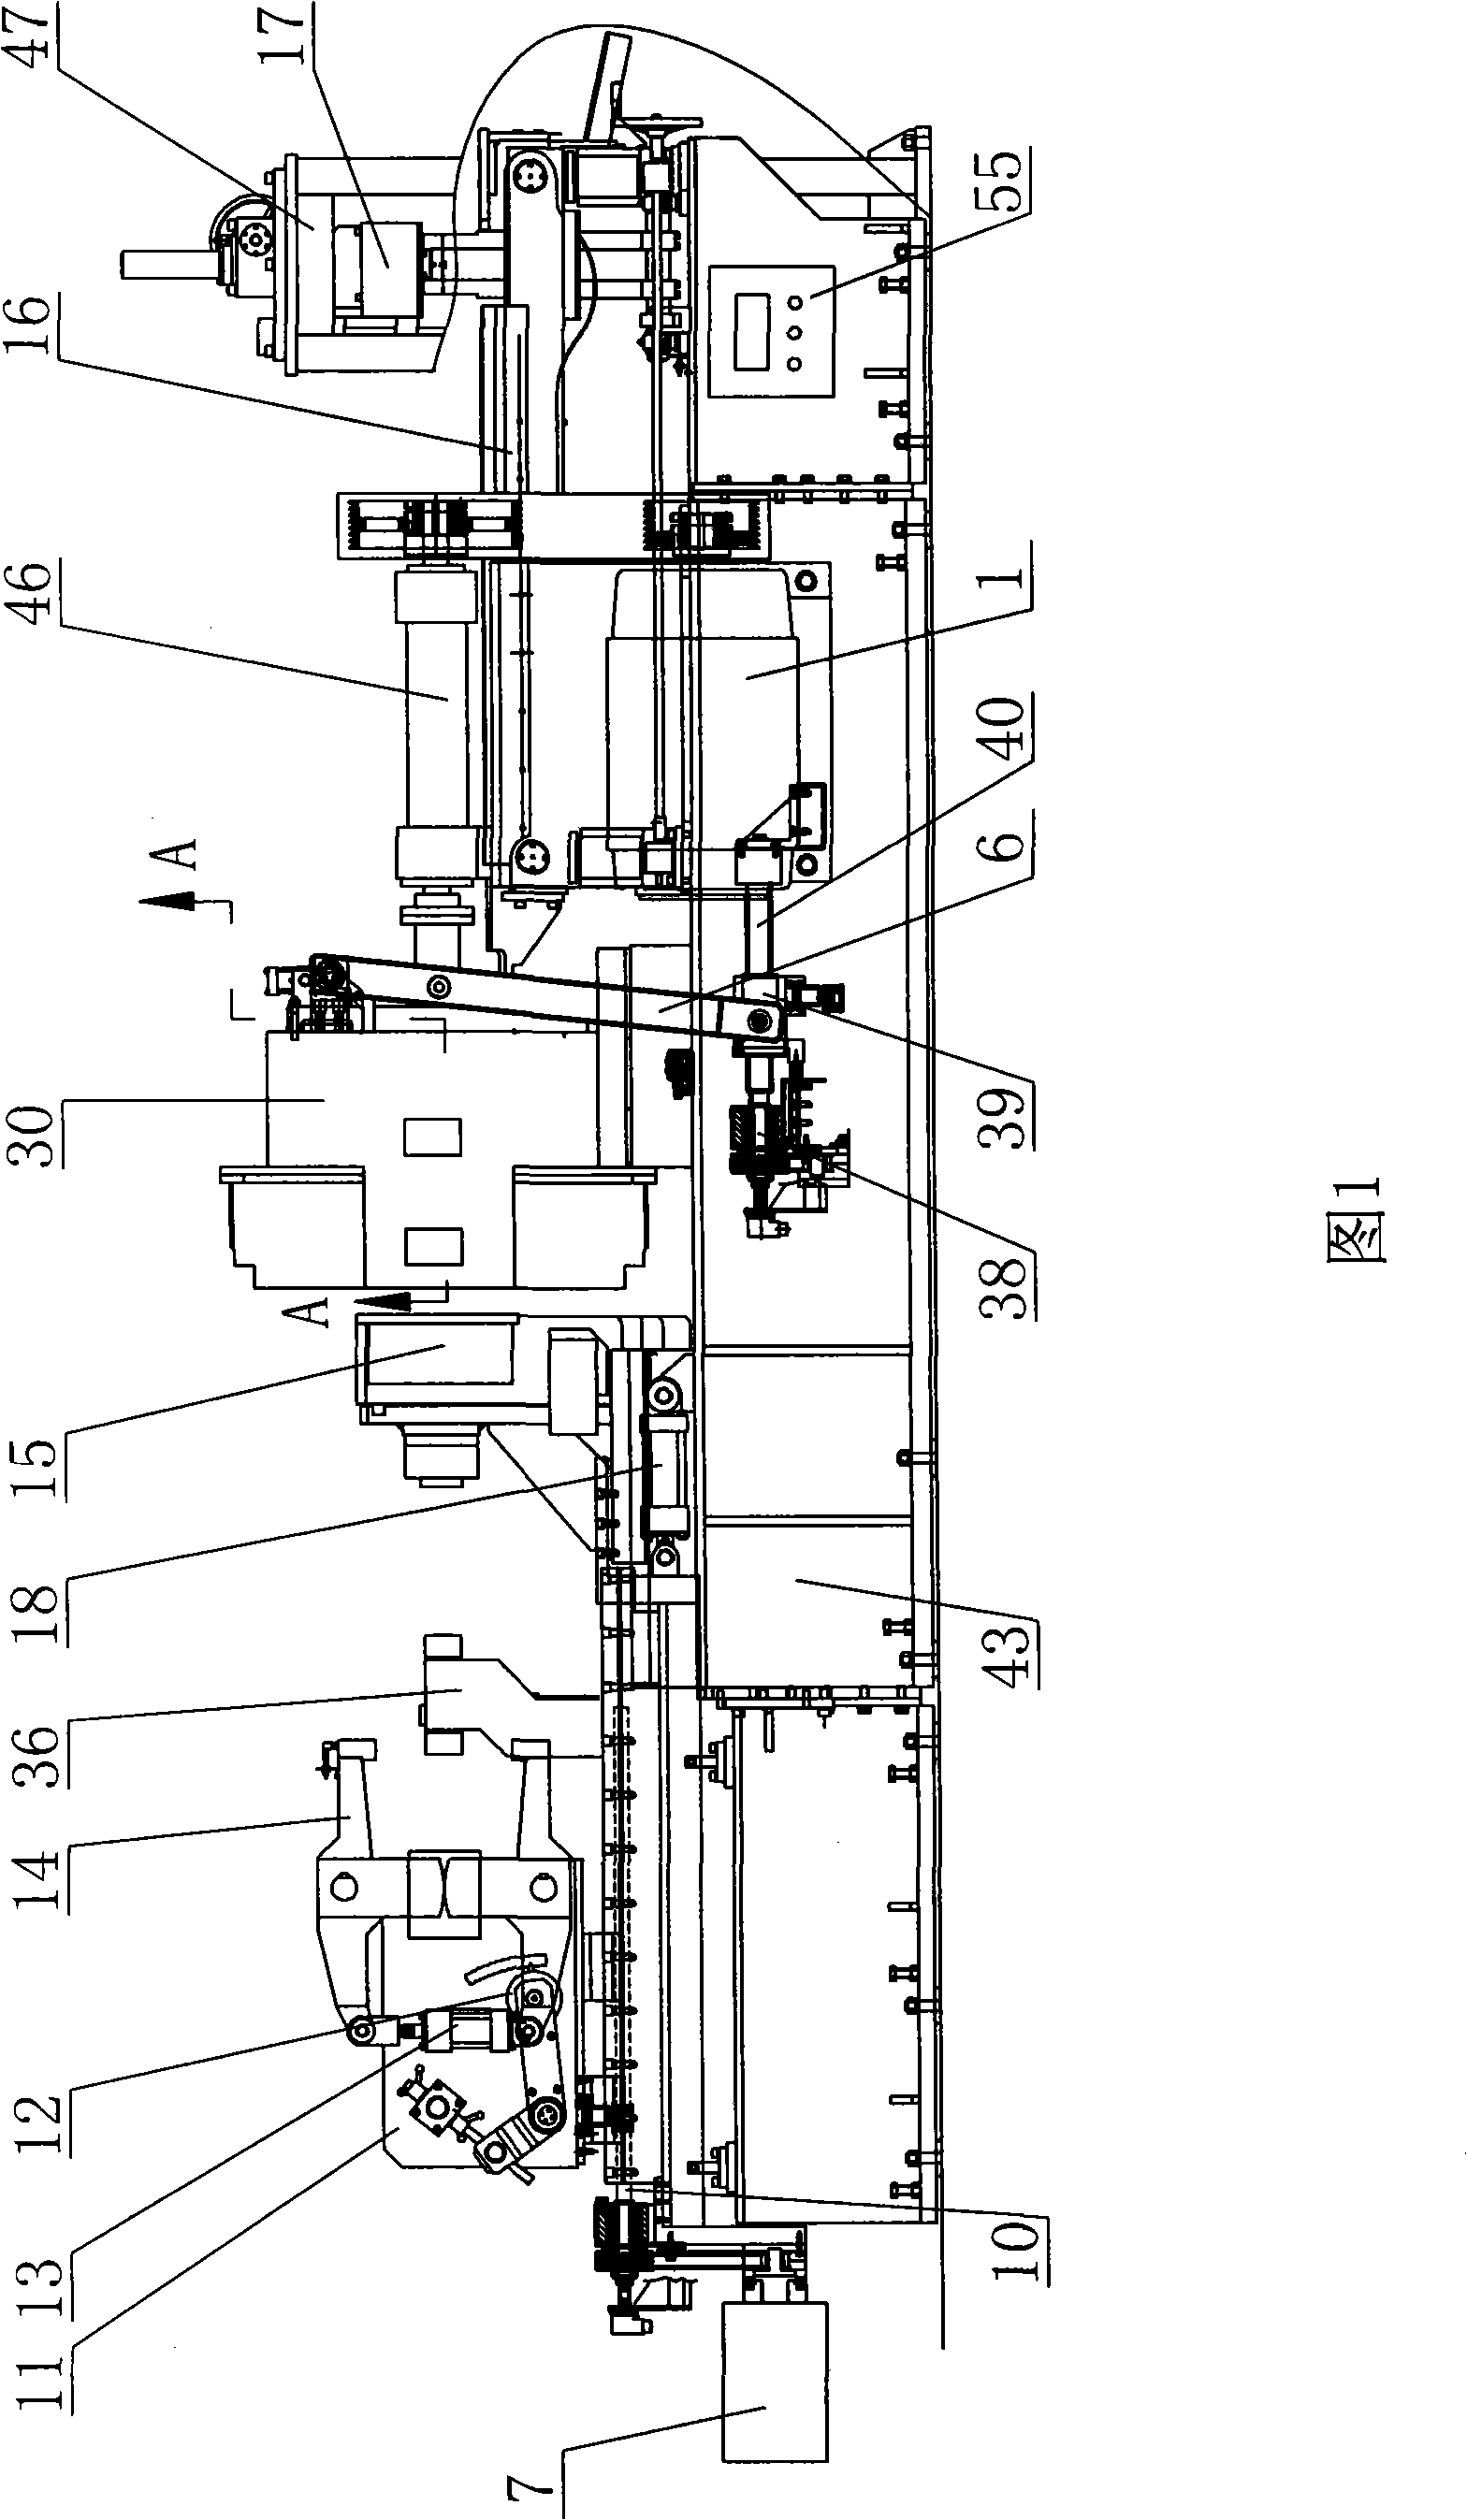 Machine tool for cutting pipe